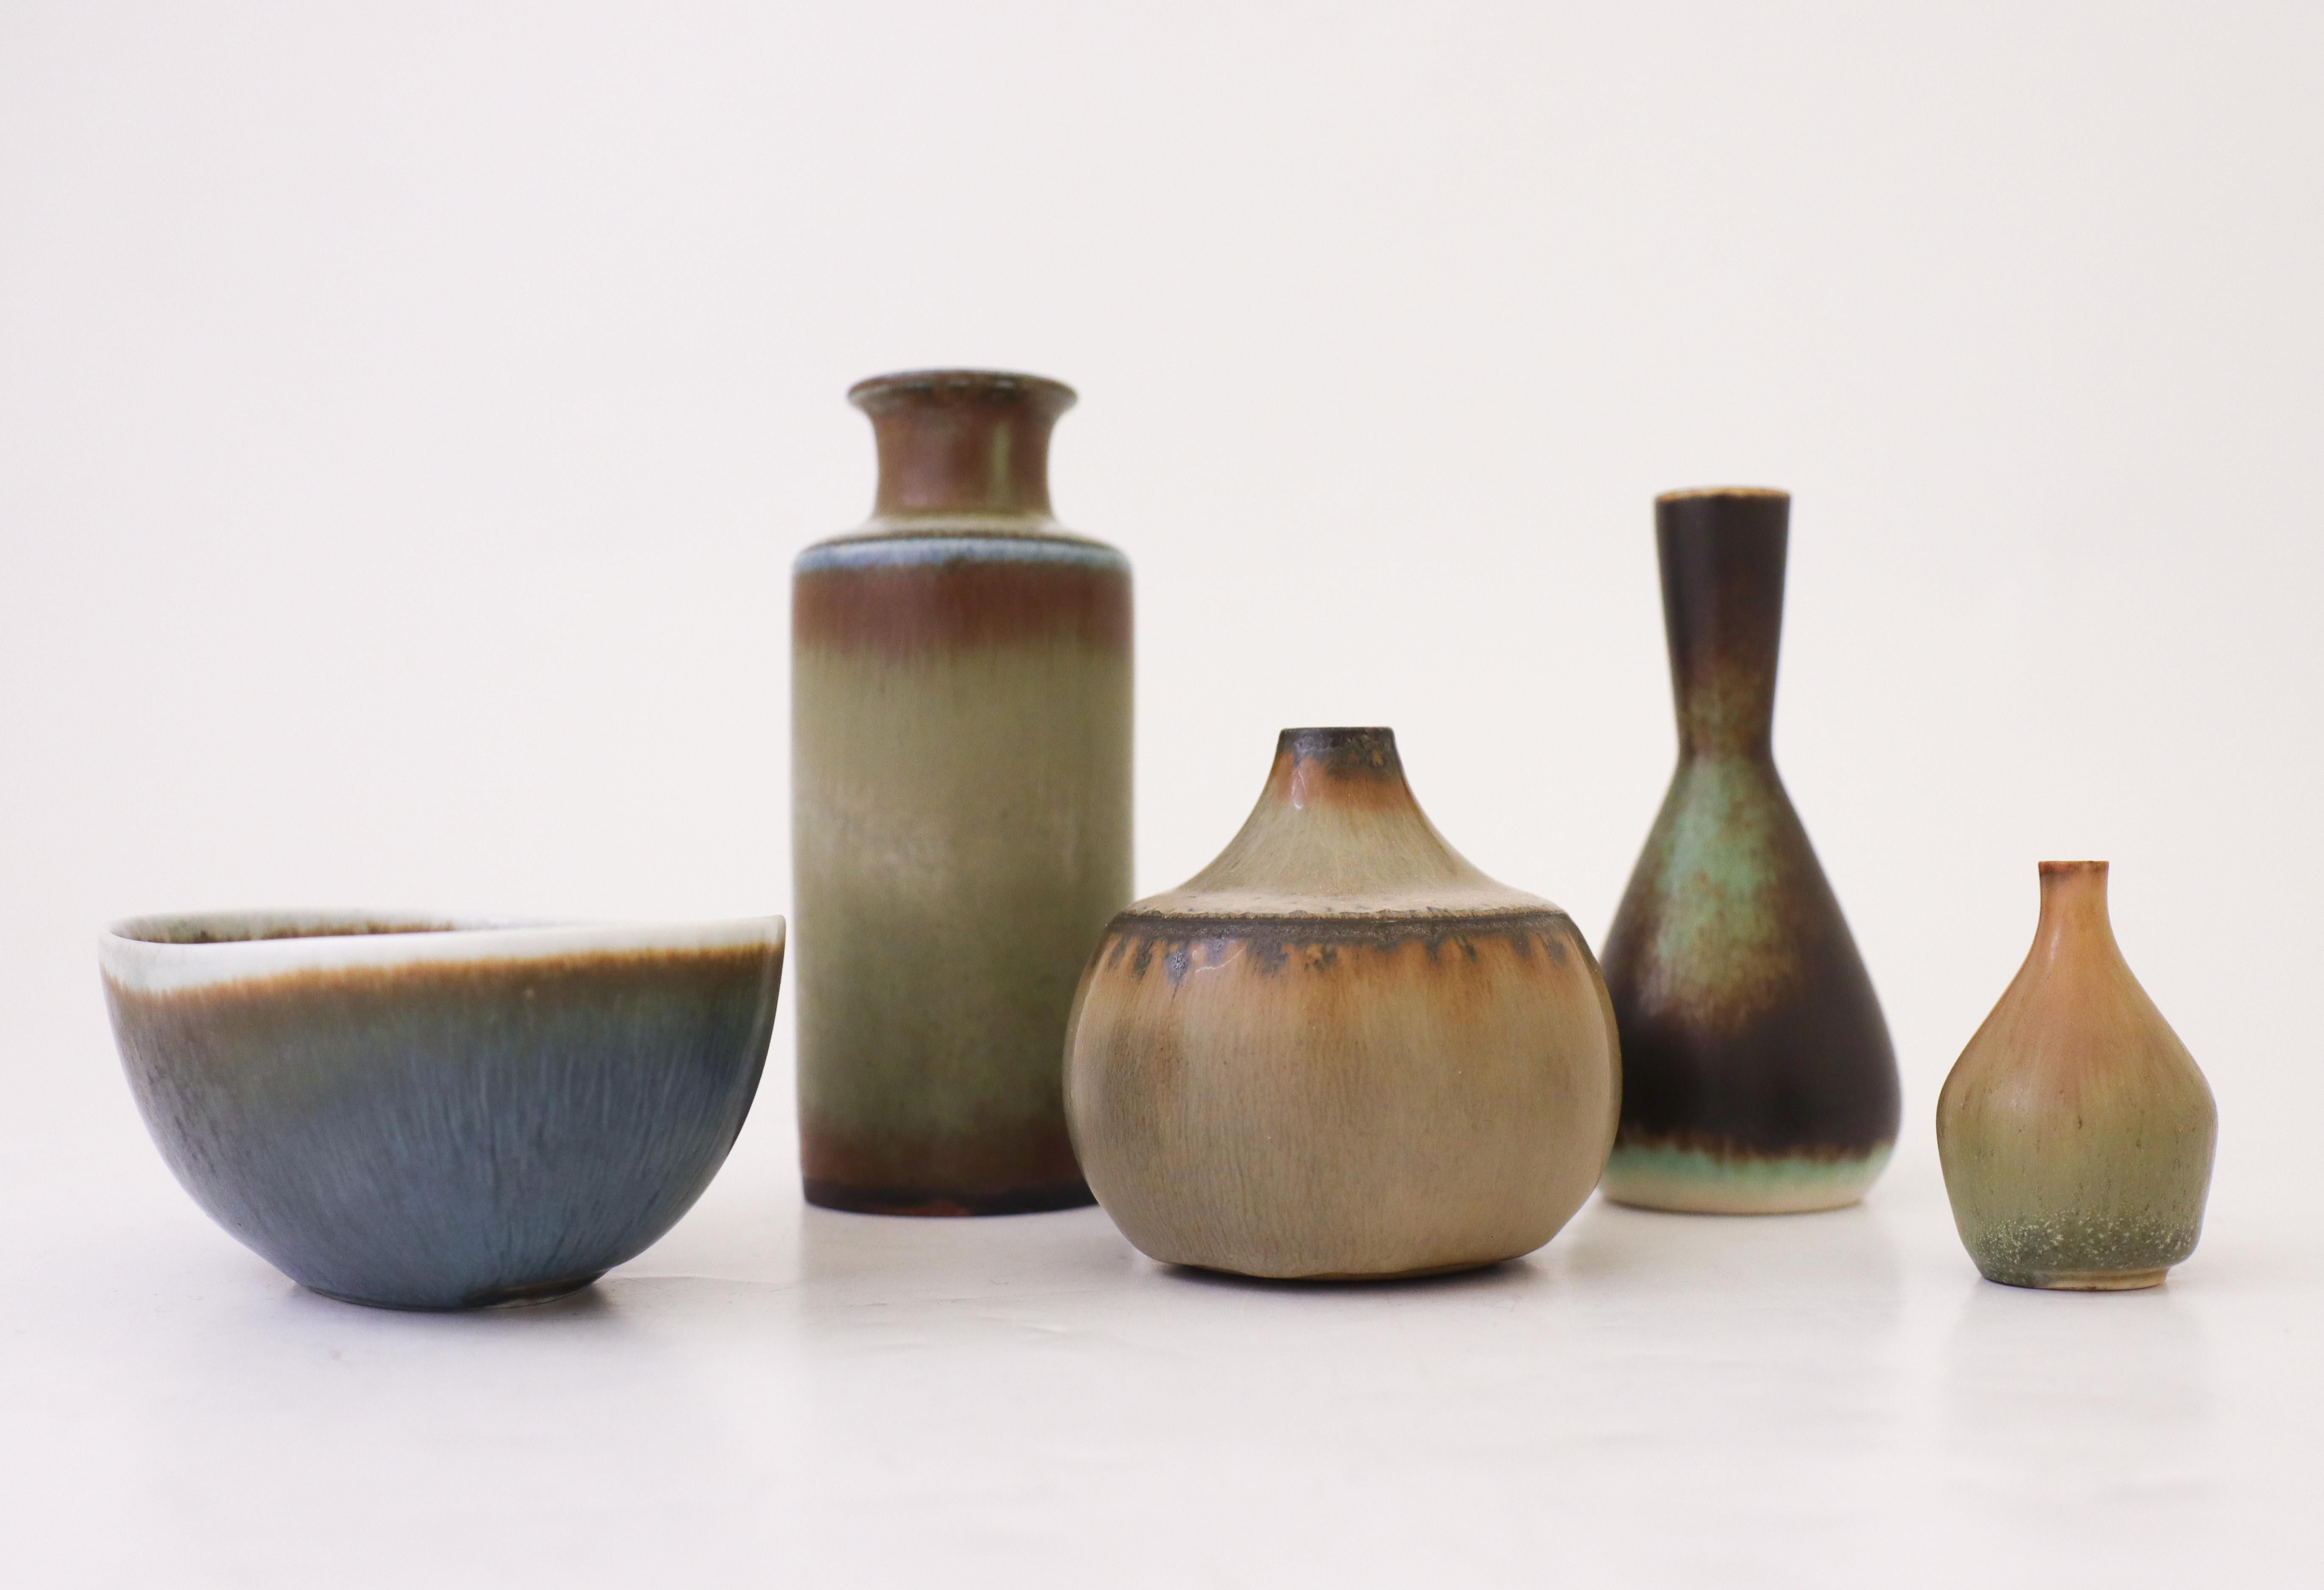 A group of four vases and one bowl designed by Carl-Harry Stålhane at Rörstrand. The vases are between 5 - 12,5 cm high and in excellent condition. They are all in excellent condition and first quality. Two of the vases are unique vases by